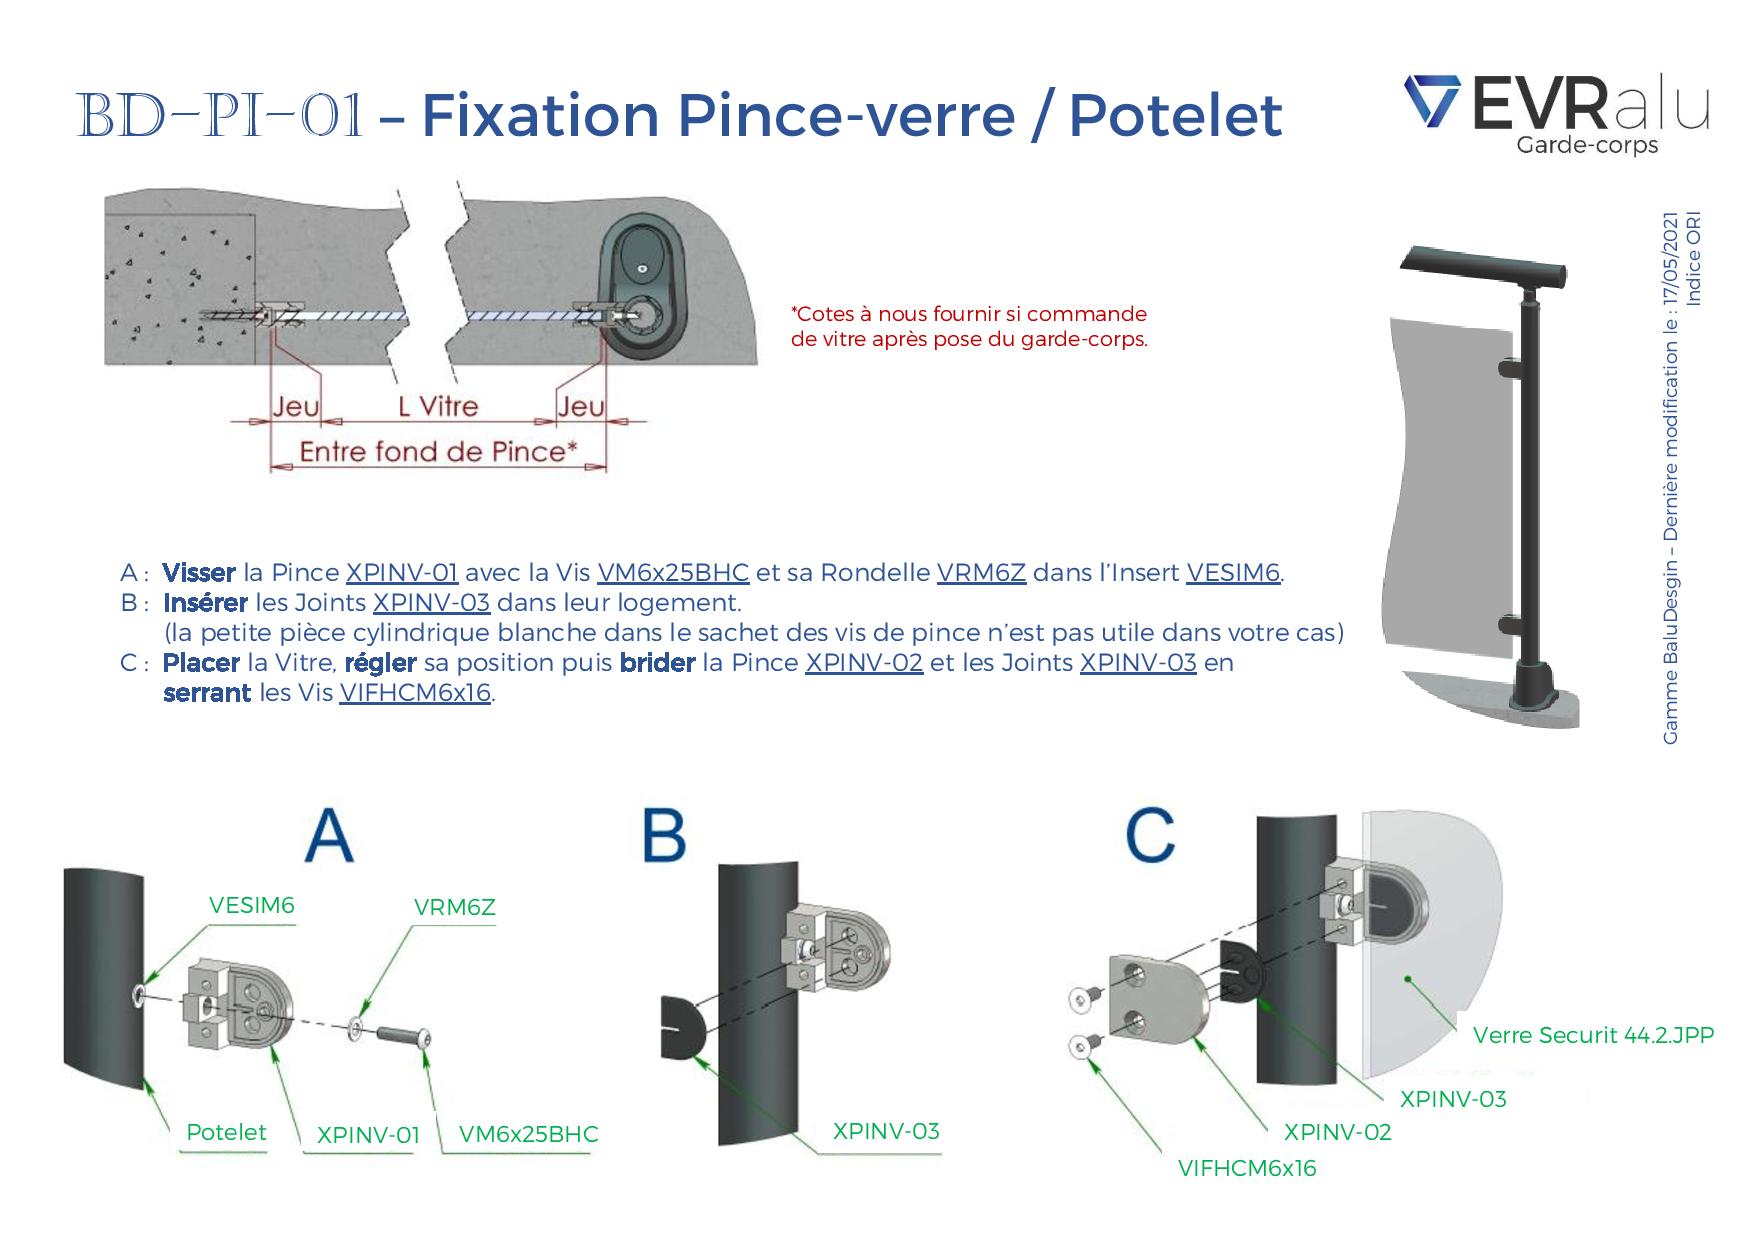 Fixations Pince-verre / Potelet